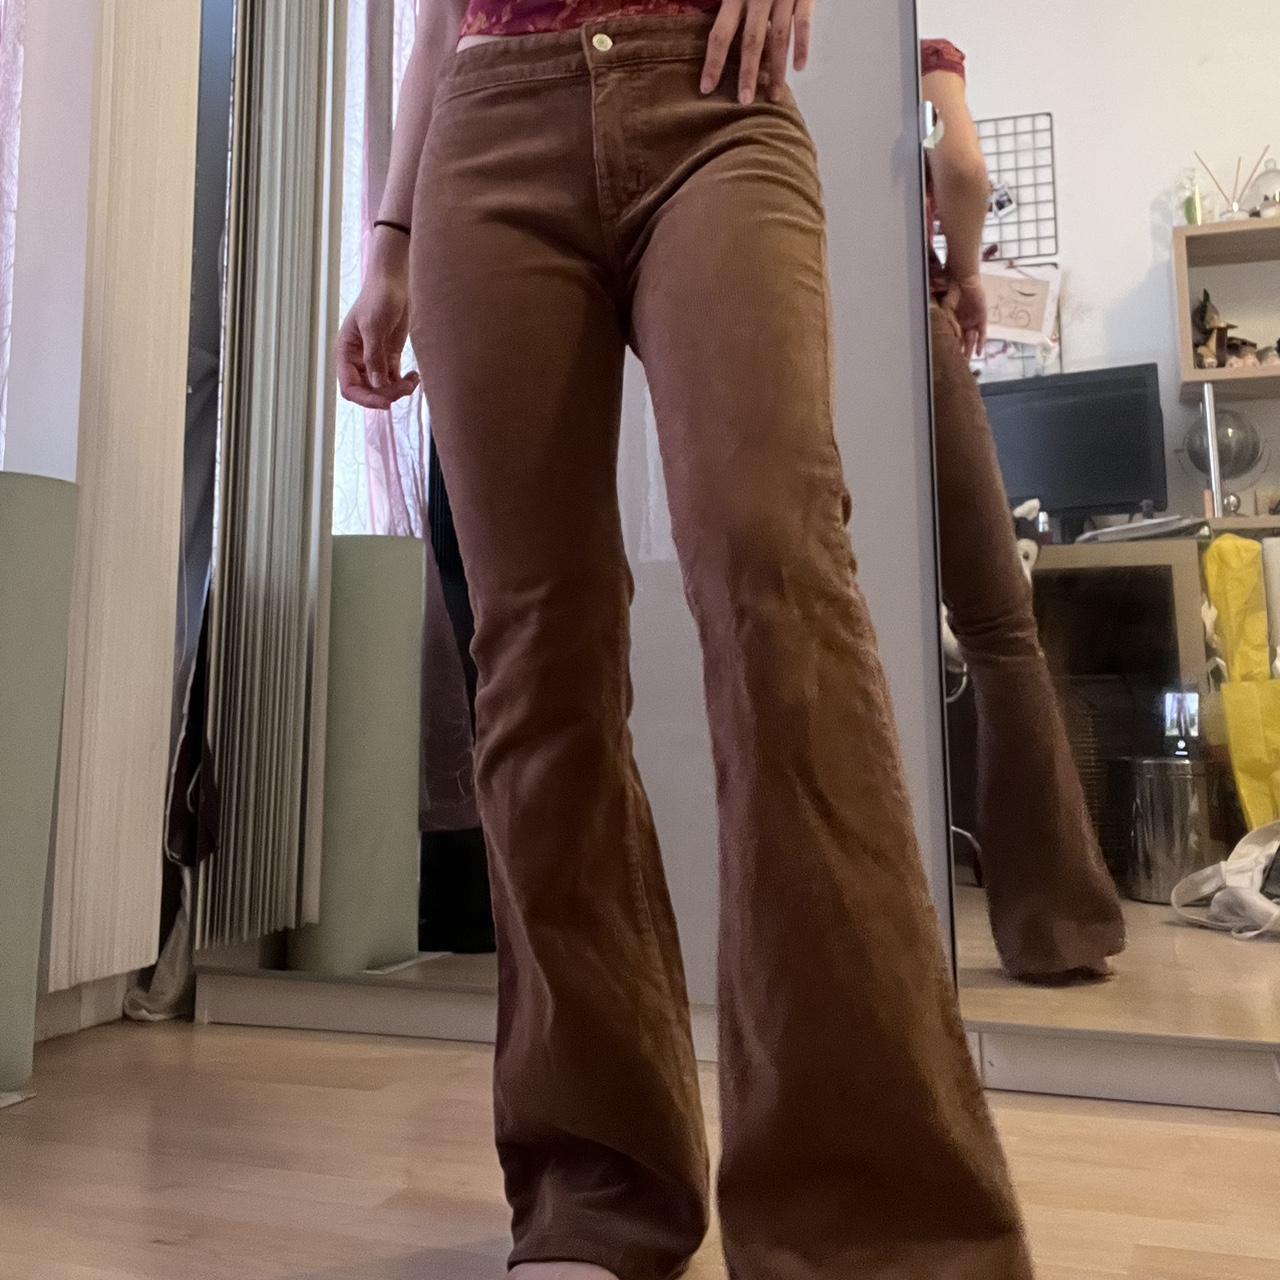 Brandy Melville Brown Flare Jeans for Women